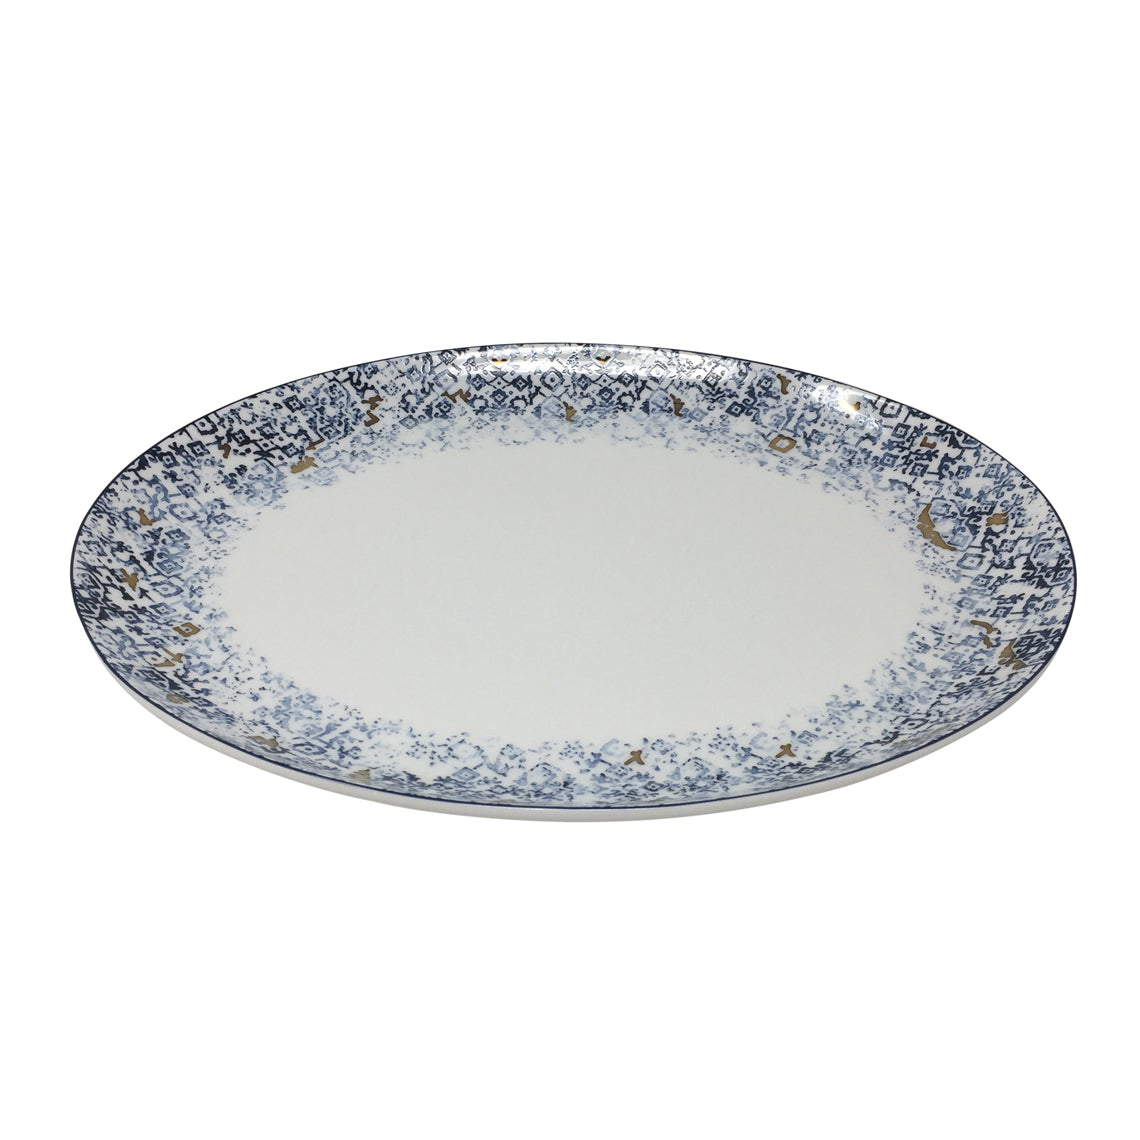 Cuenca 14" Oval Platter White Background Photo